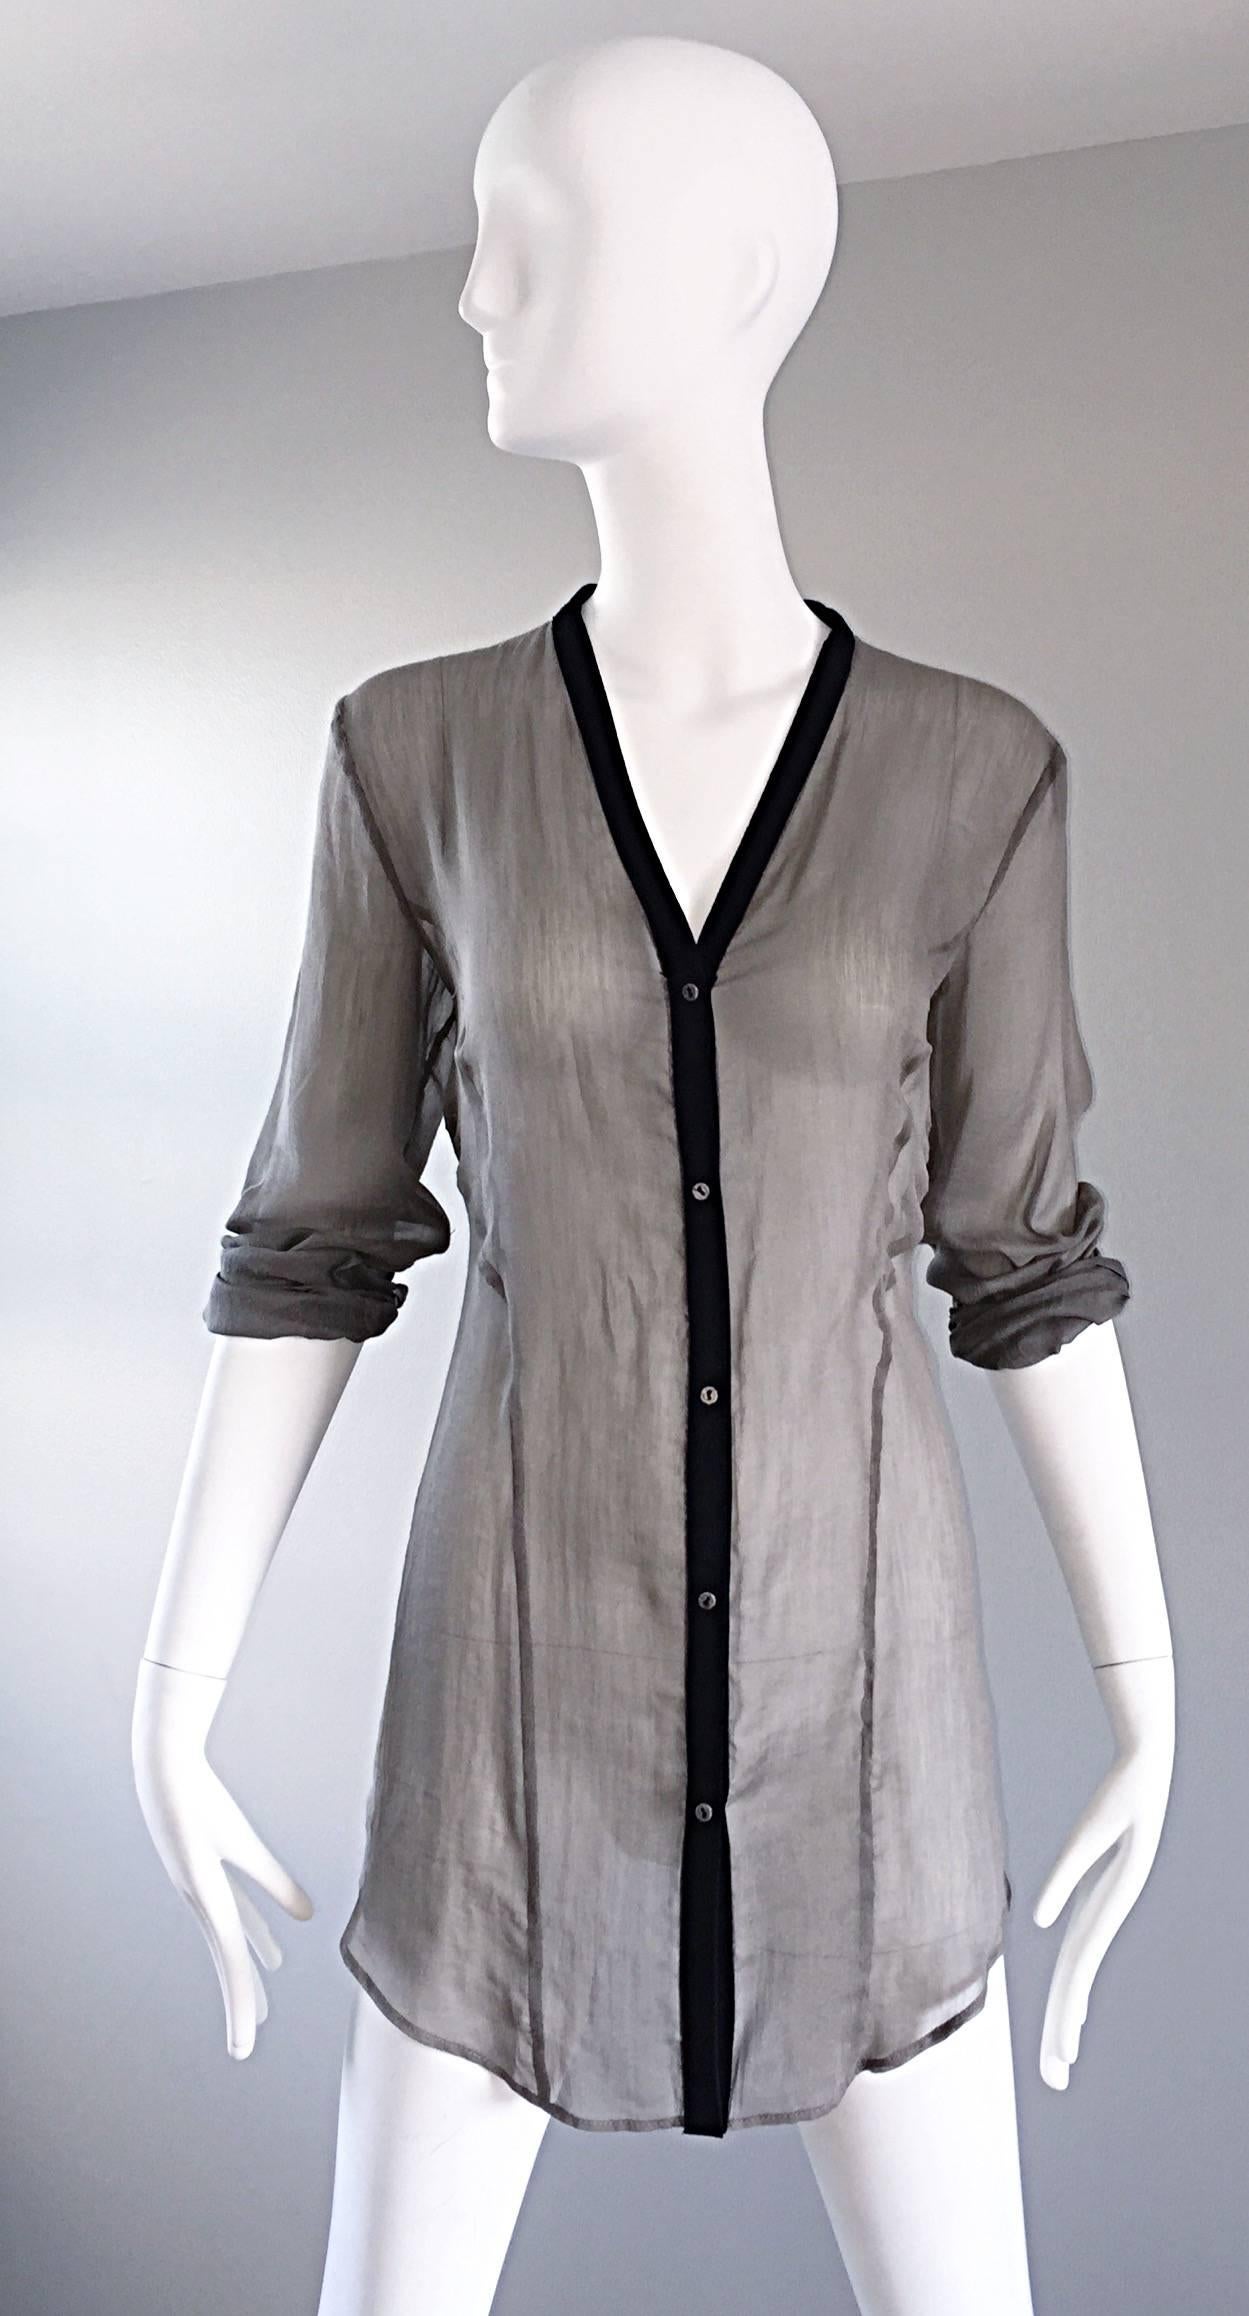 Helmut Lang 2000s Silk + Leather Semi Sheer Long Sleeve Vintage Blouse / Tunic In Excellent Condition For Sale In San Diego, CA